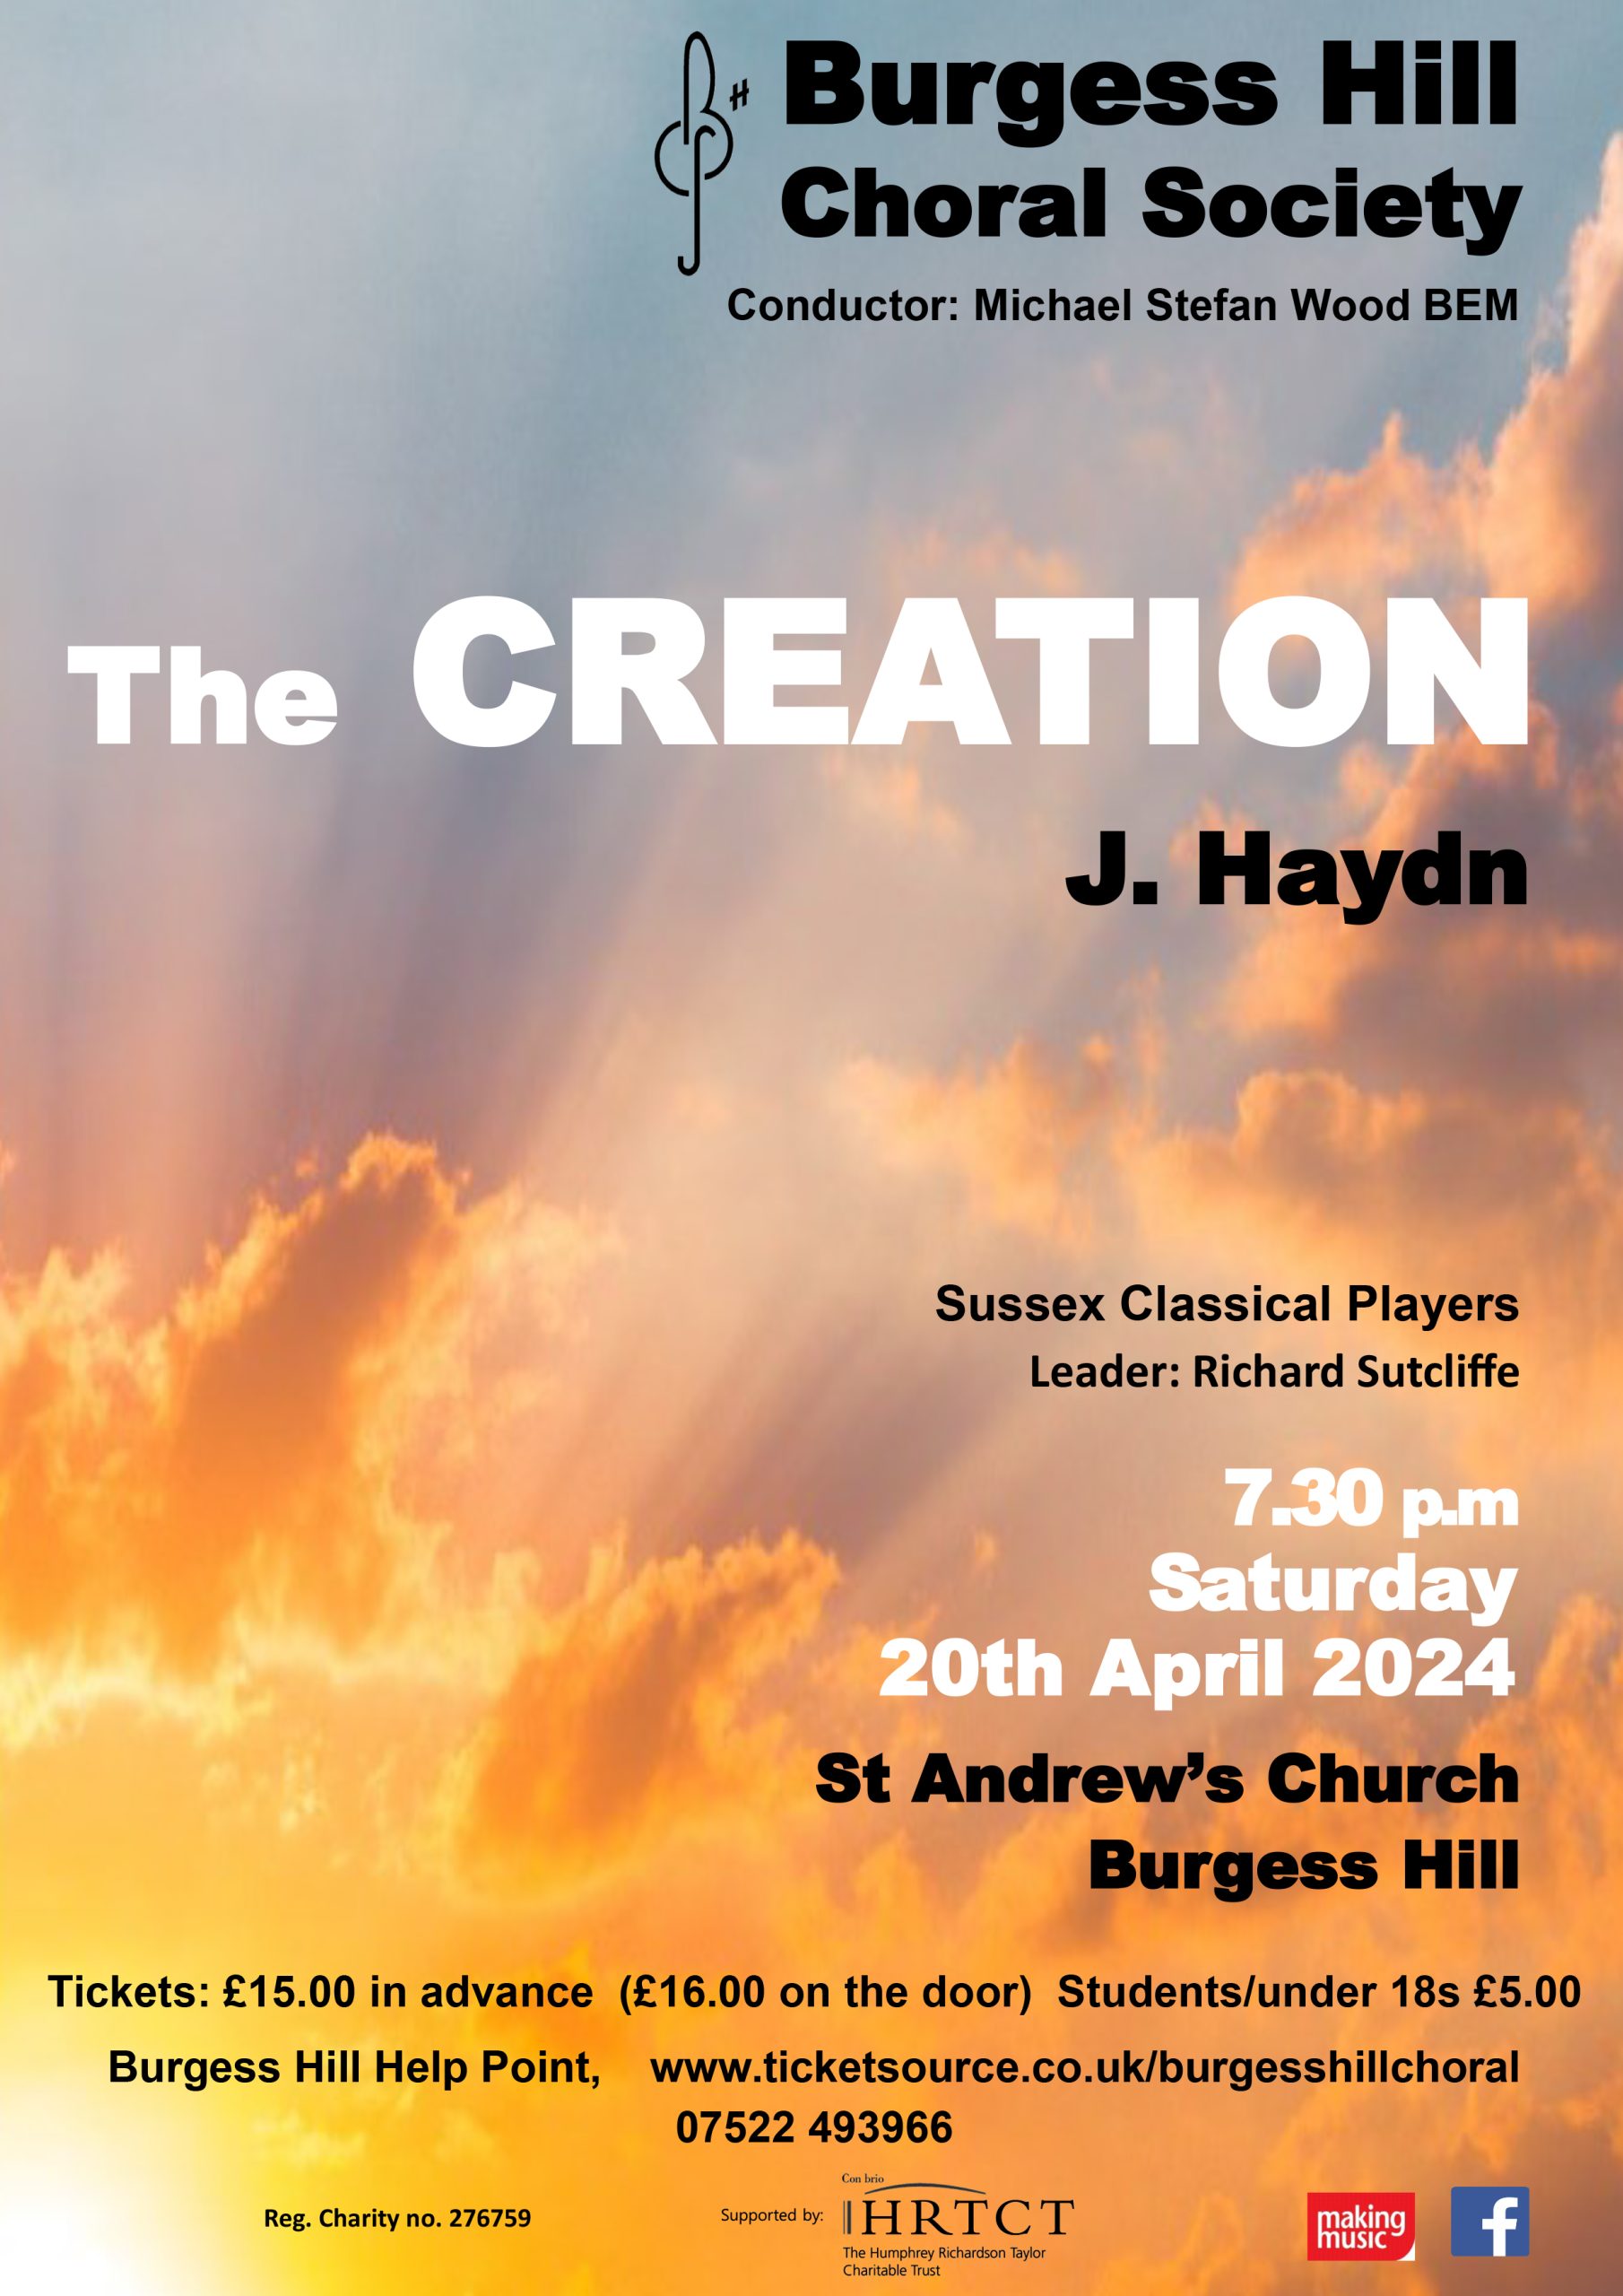 Haydn: The Creation. Burgess Hill Choral Society’s Spring Concert